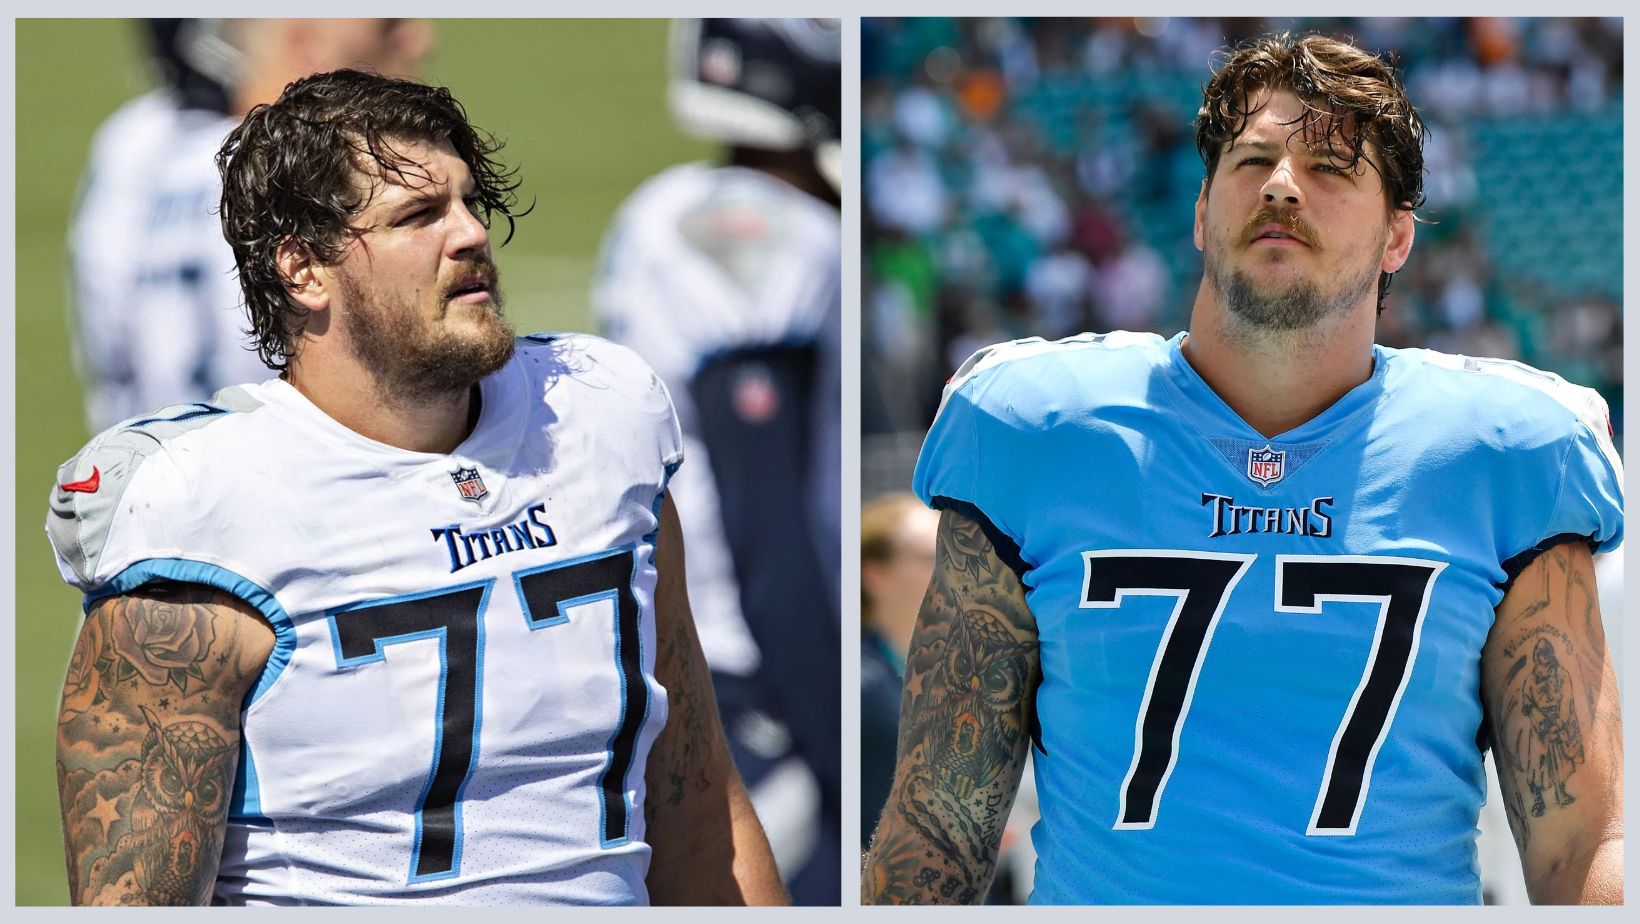 Taylor Lewan Weight Loss Journey: Did He Undergo Plastic Surgery?